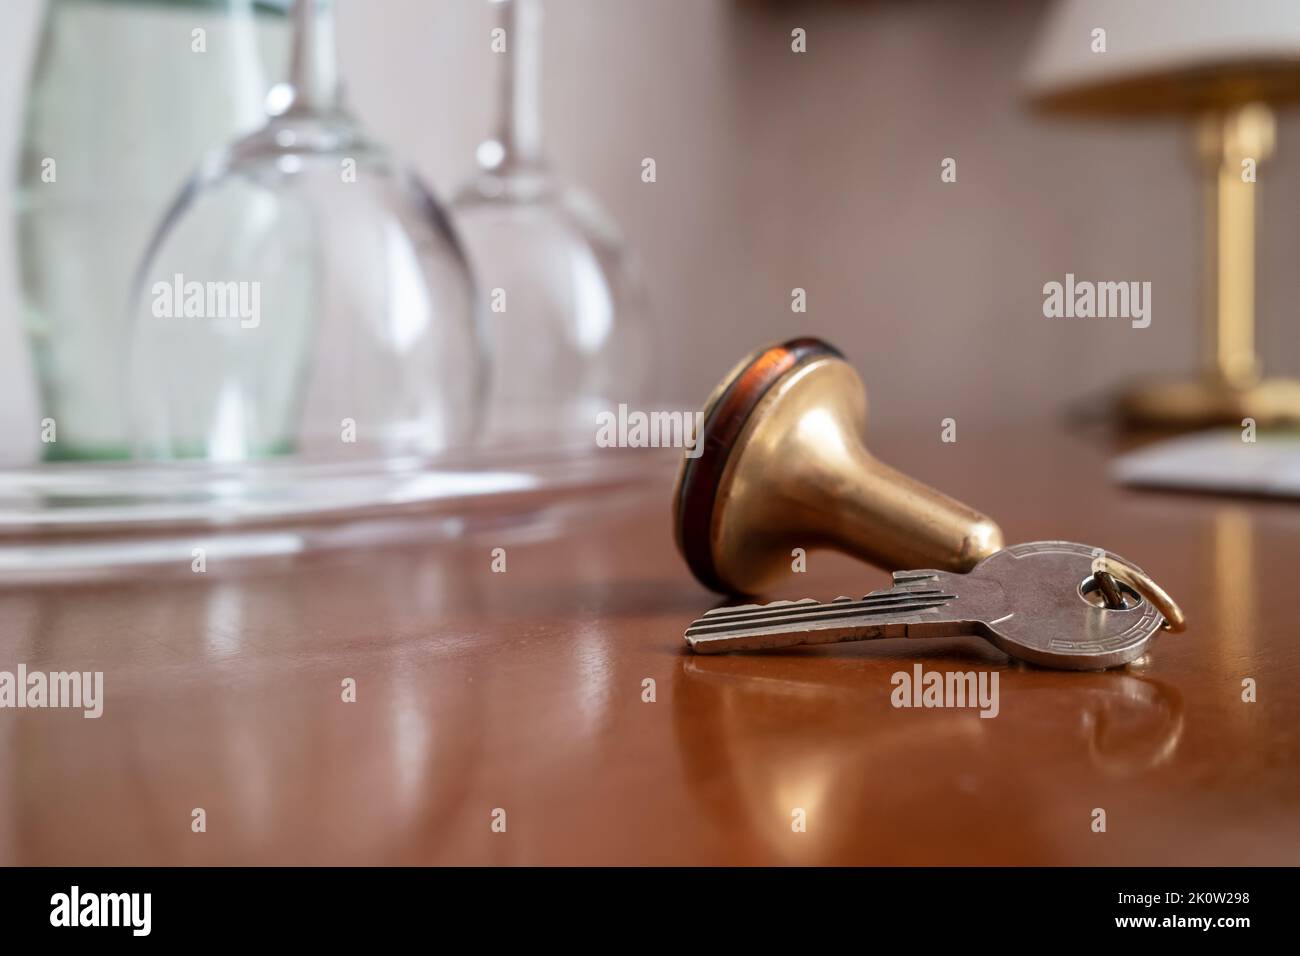 Key with a key fob from the hotel room lies on the table, against a blurred background of clean wine glasses and a lamp. Close-up. Stock Photo